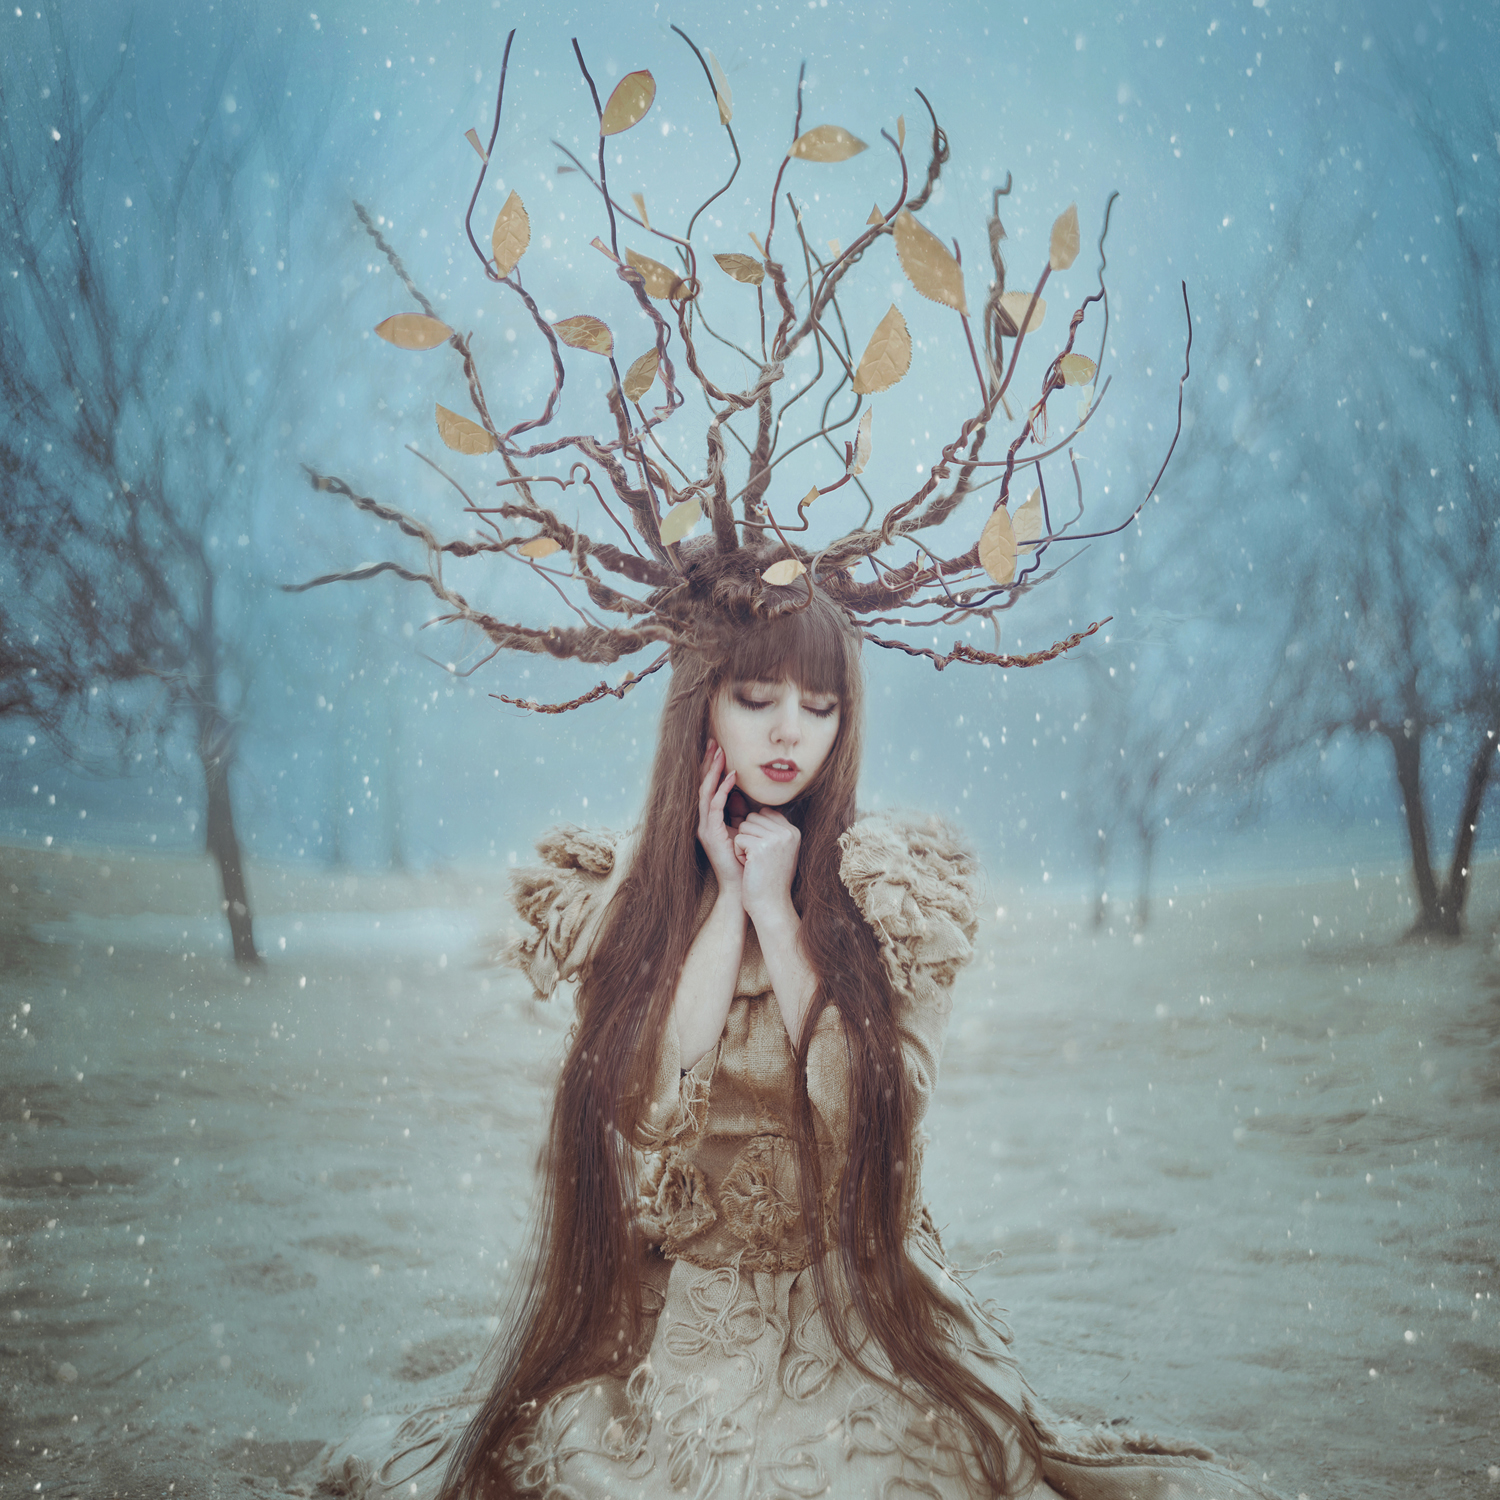 Photographer Anita Anti Creates Fairytale Imagery Thanks to Broncolor's Gen NEXT Competition